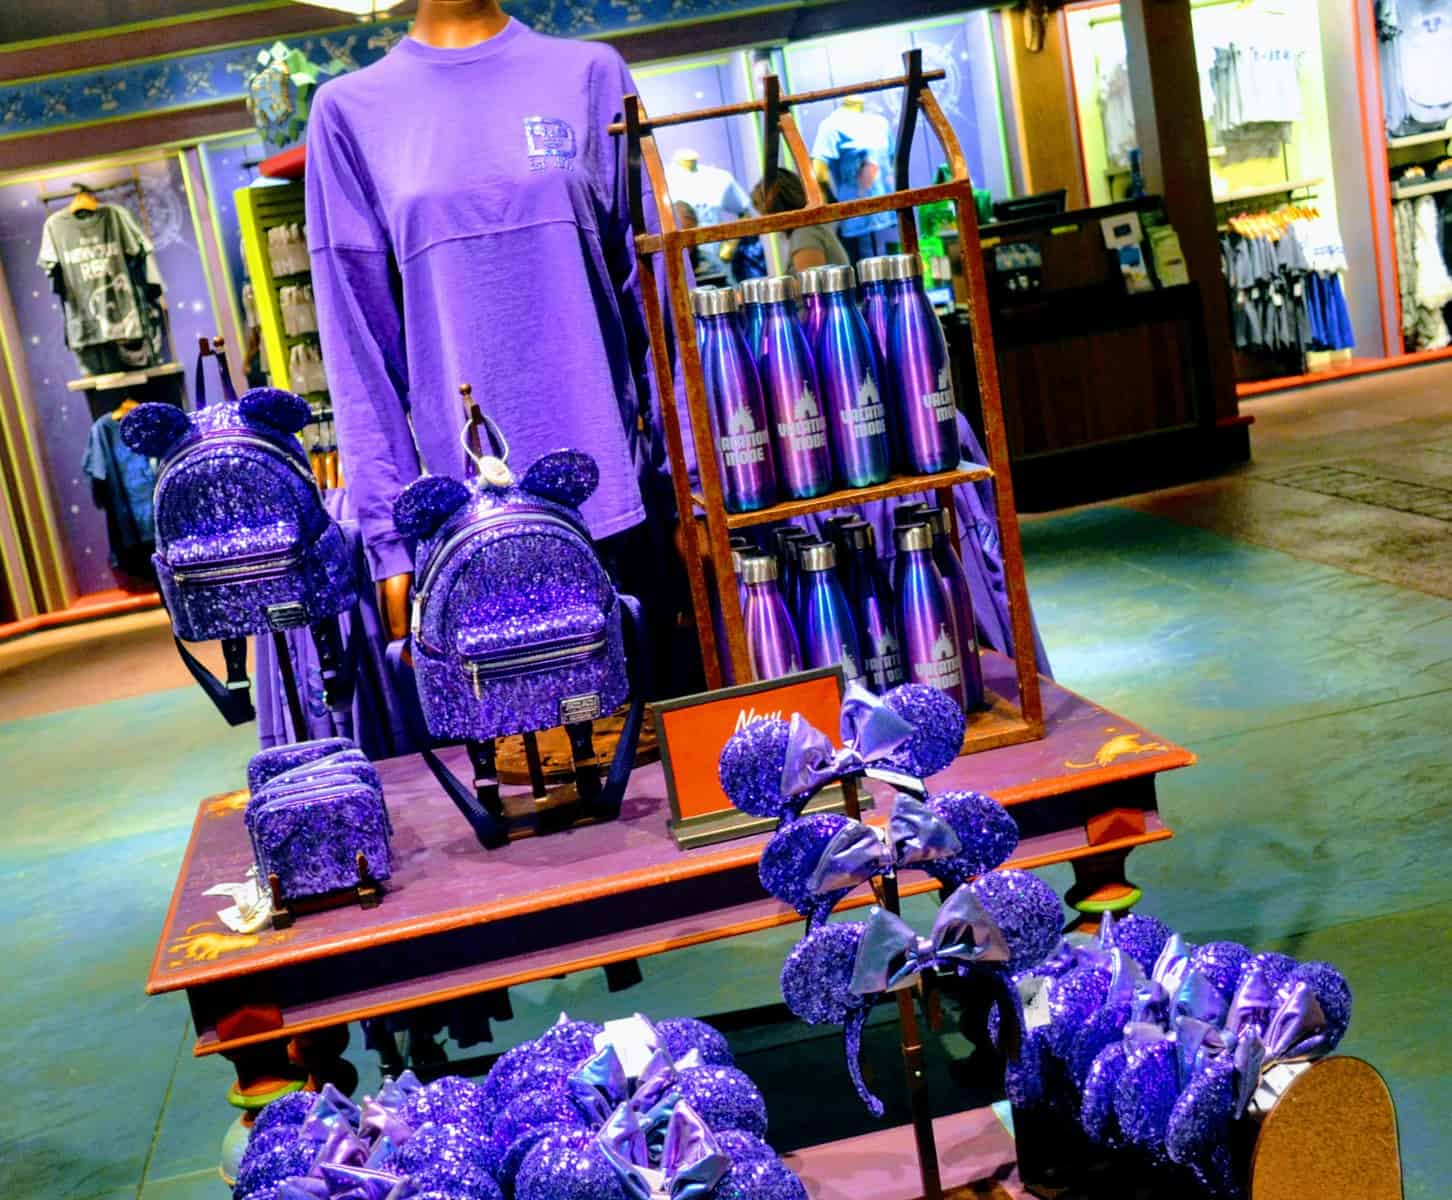 Everything You Need to Know About Money and Shopping at Disney World